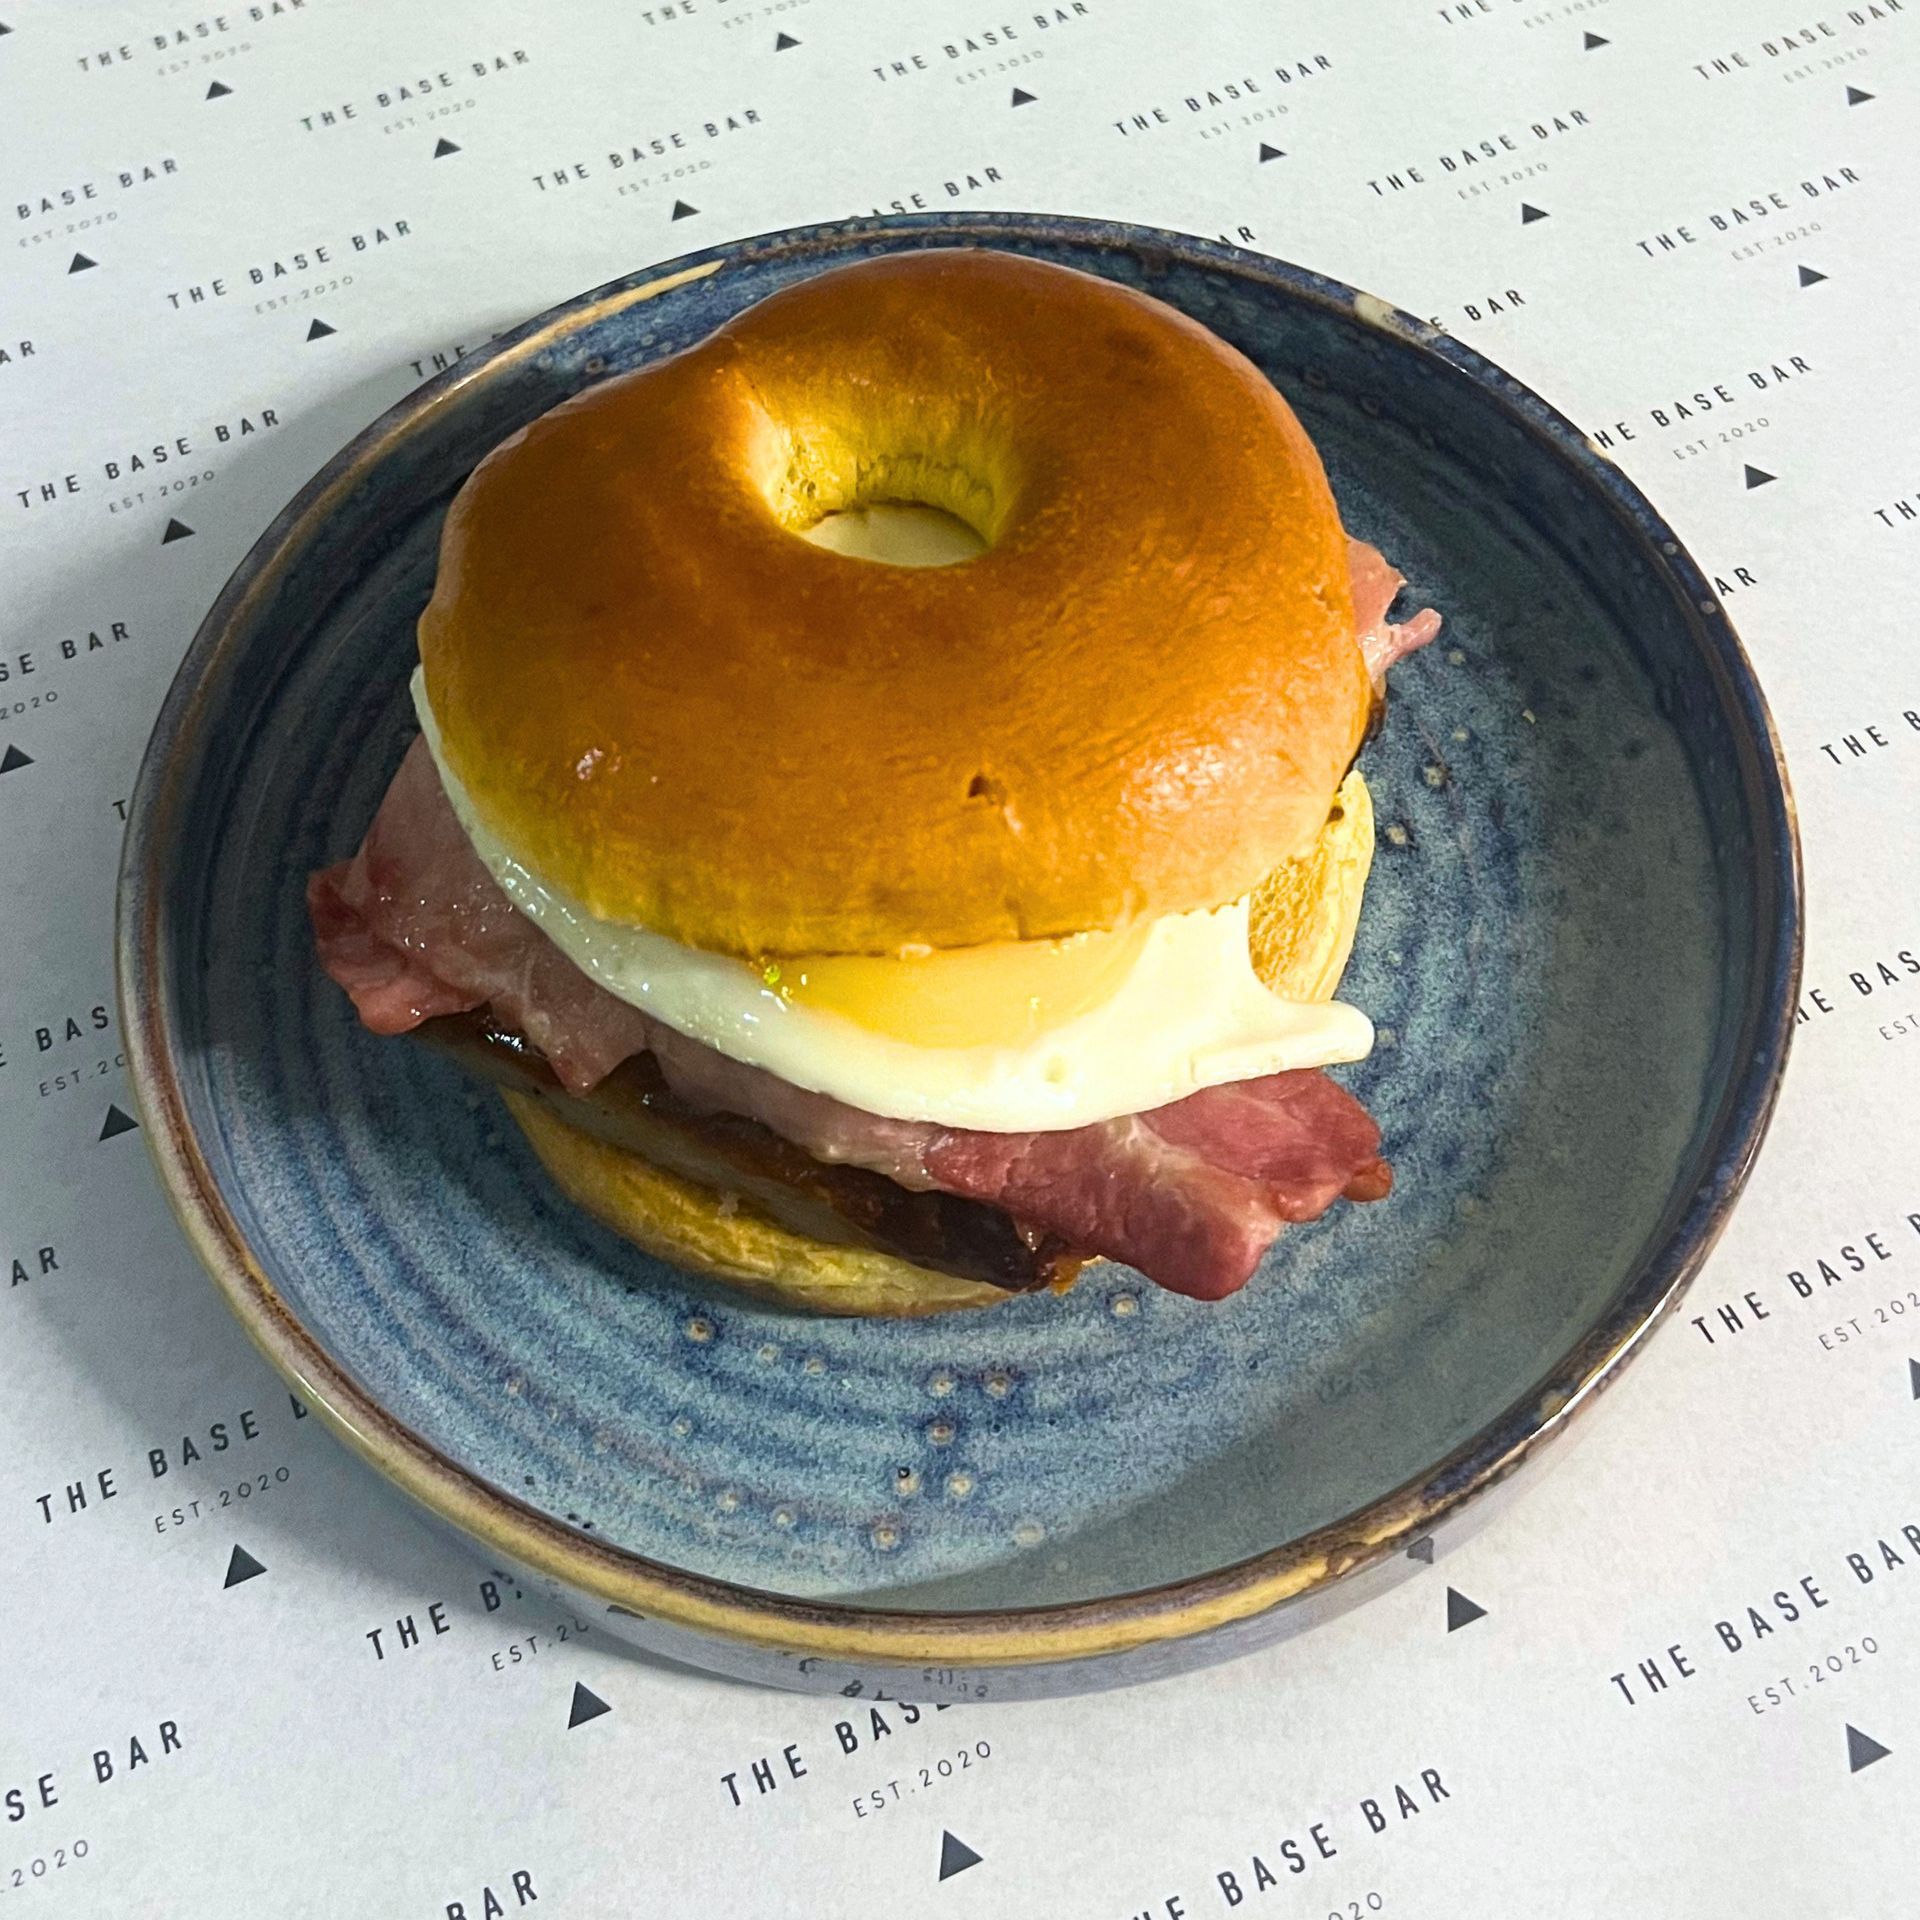 The Base Bar Bagel Special